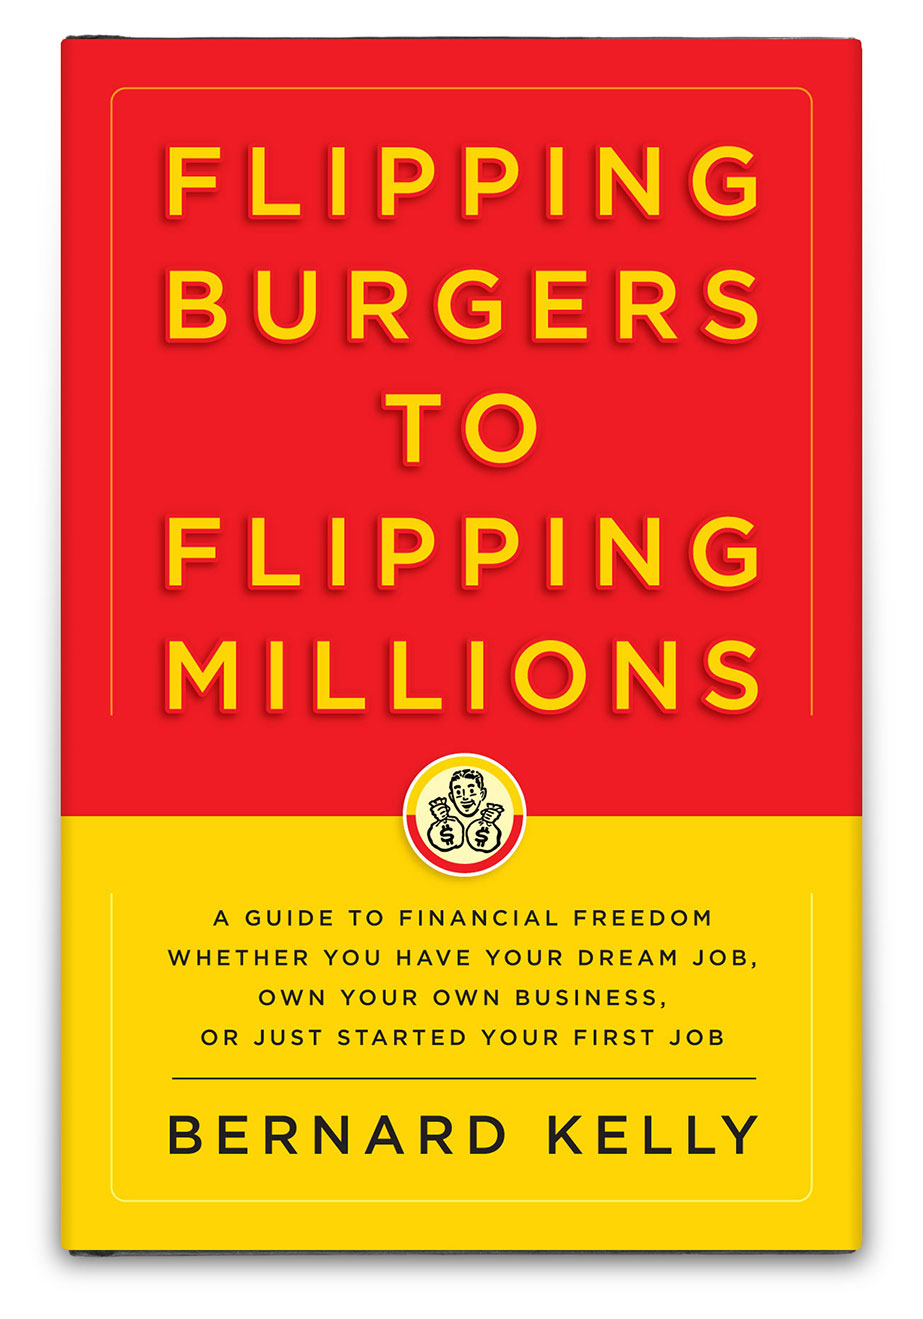 FLIPPING BURGERS TO FLIPPING MILLIONS